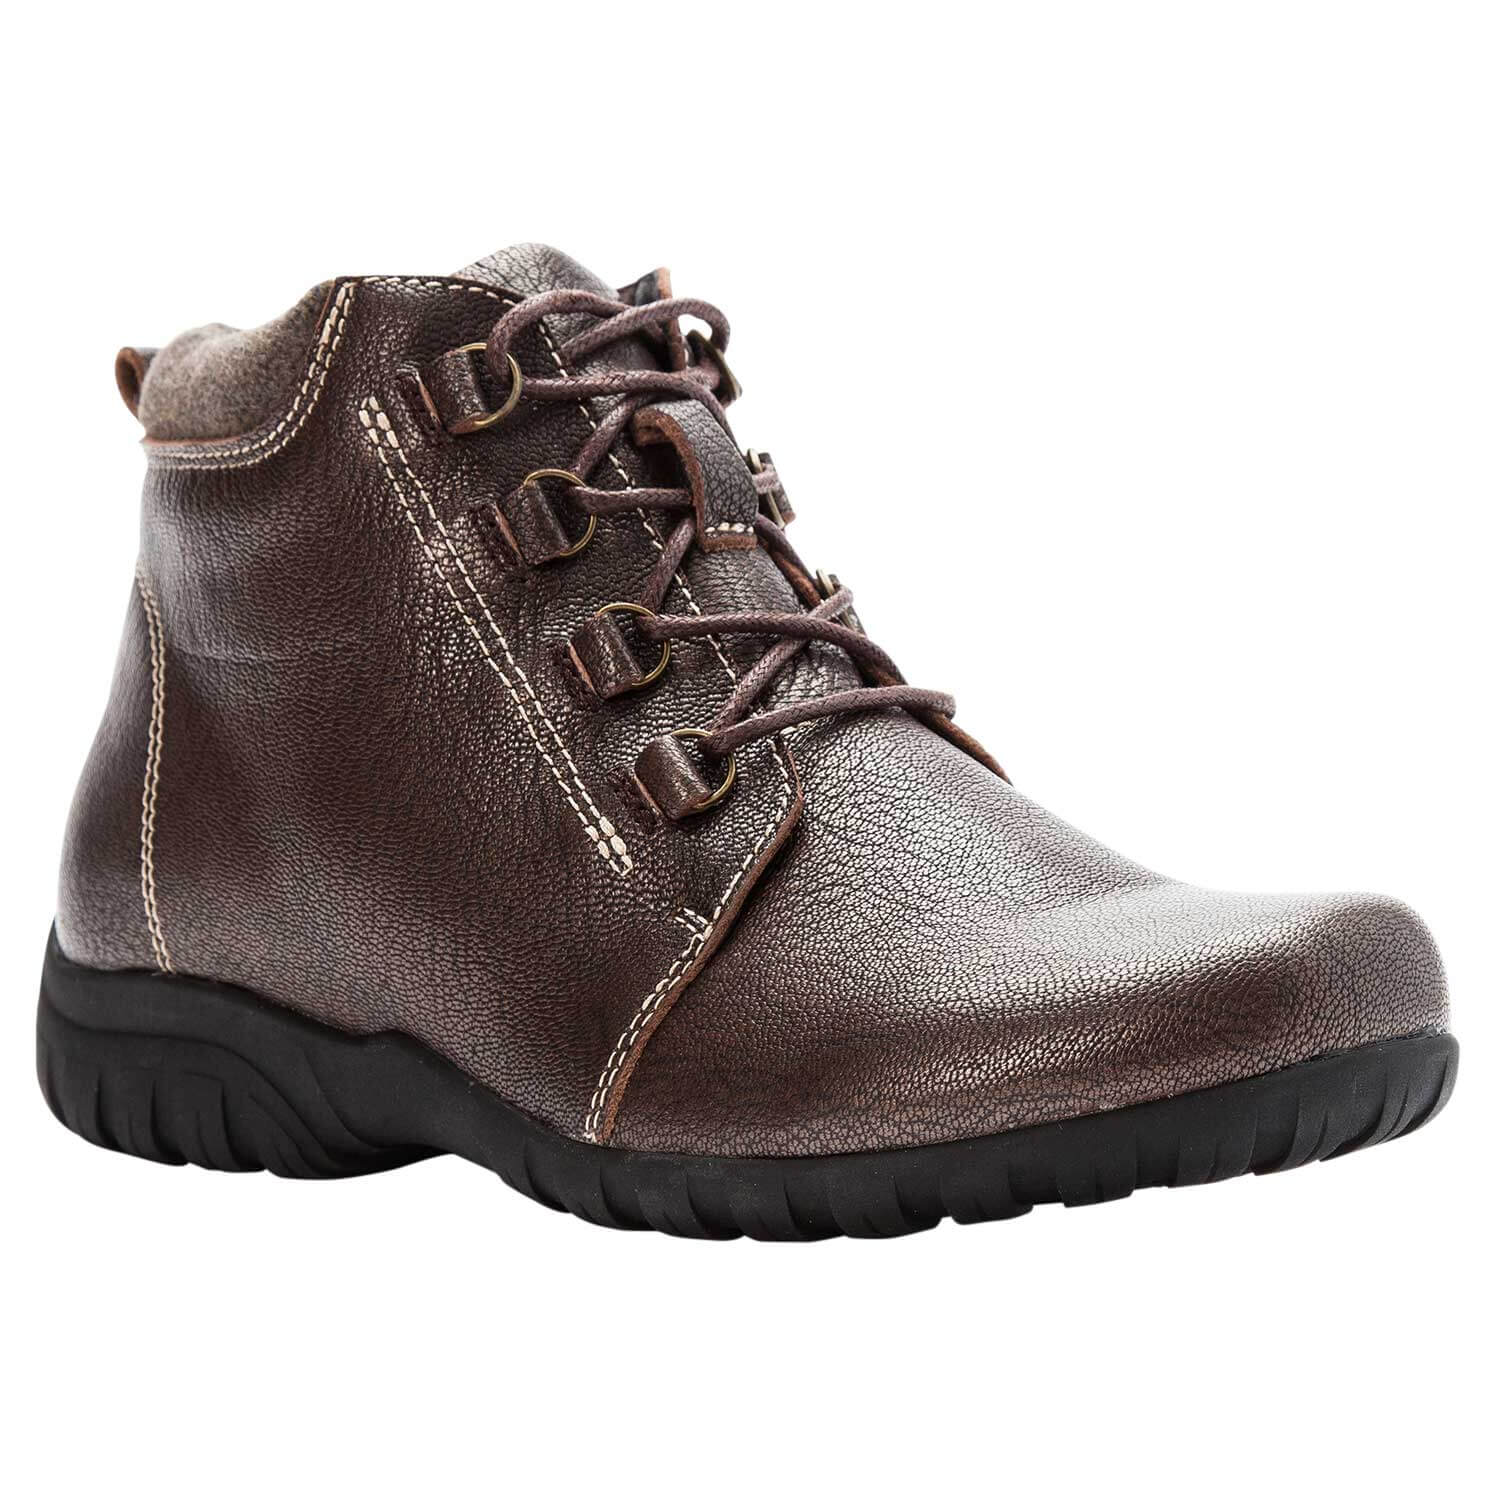 Propet Delaney Smooth WFV002L 5 inch Women's Casual Boot